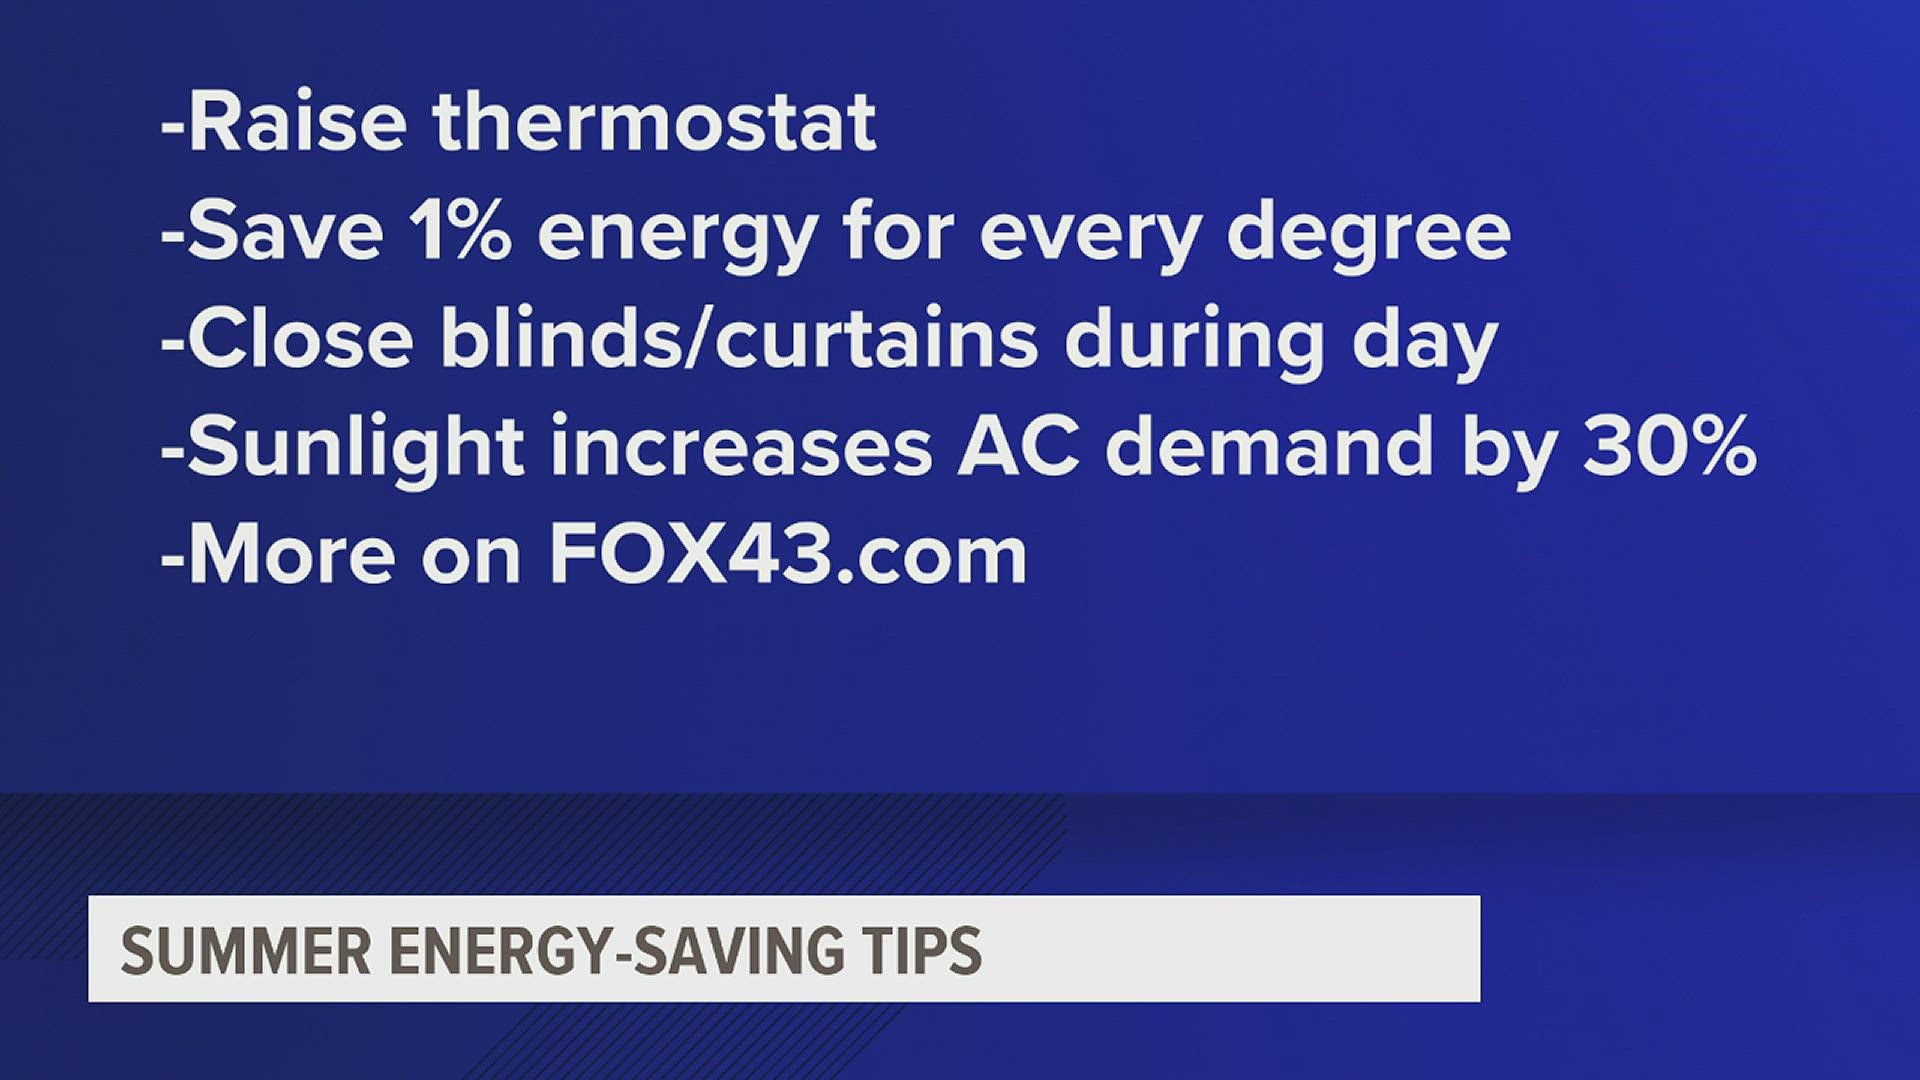 According to experts at NRG, these tips will help keep you cool while not breaking the bank.